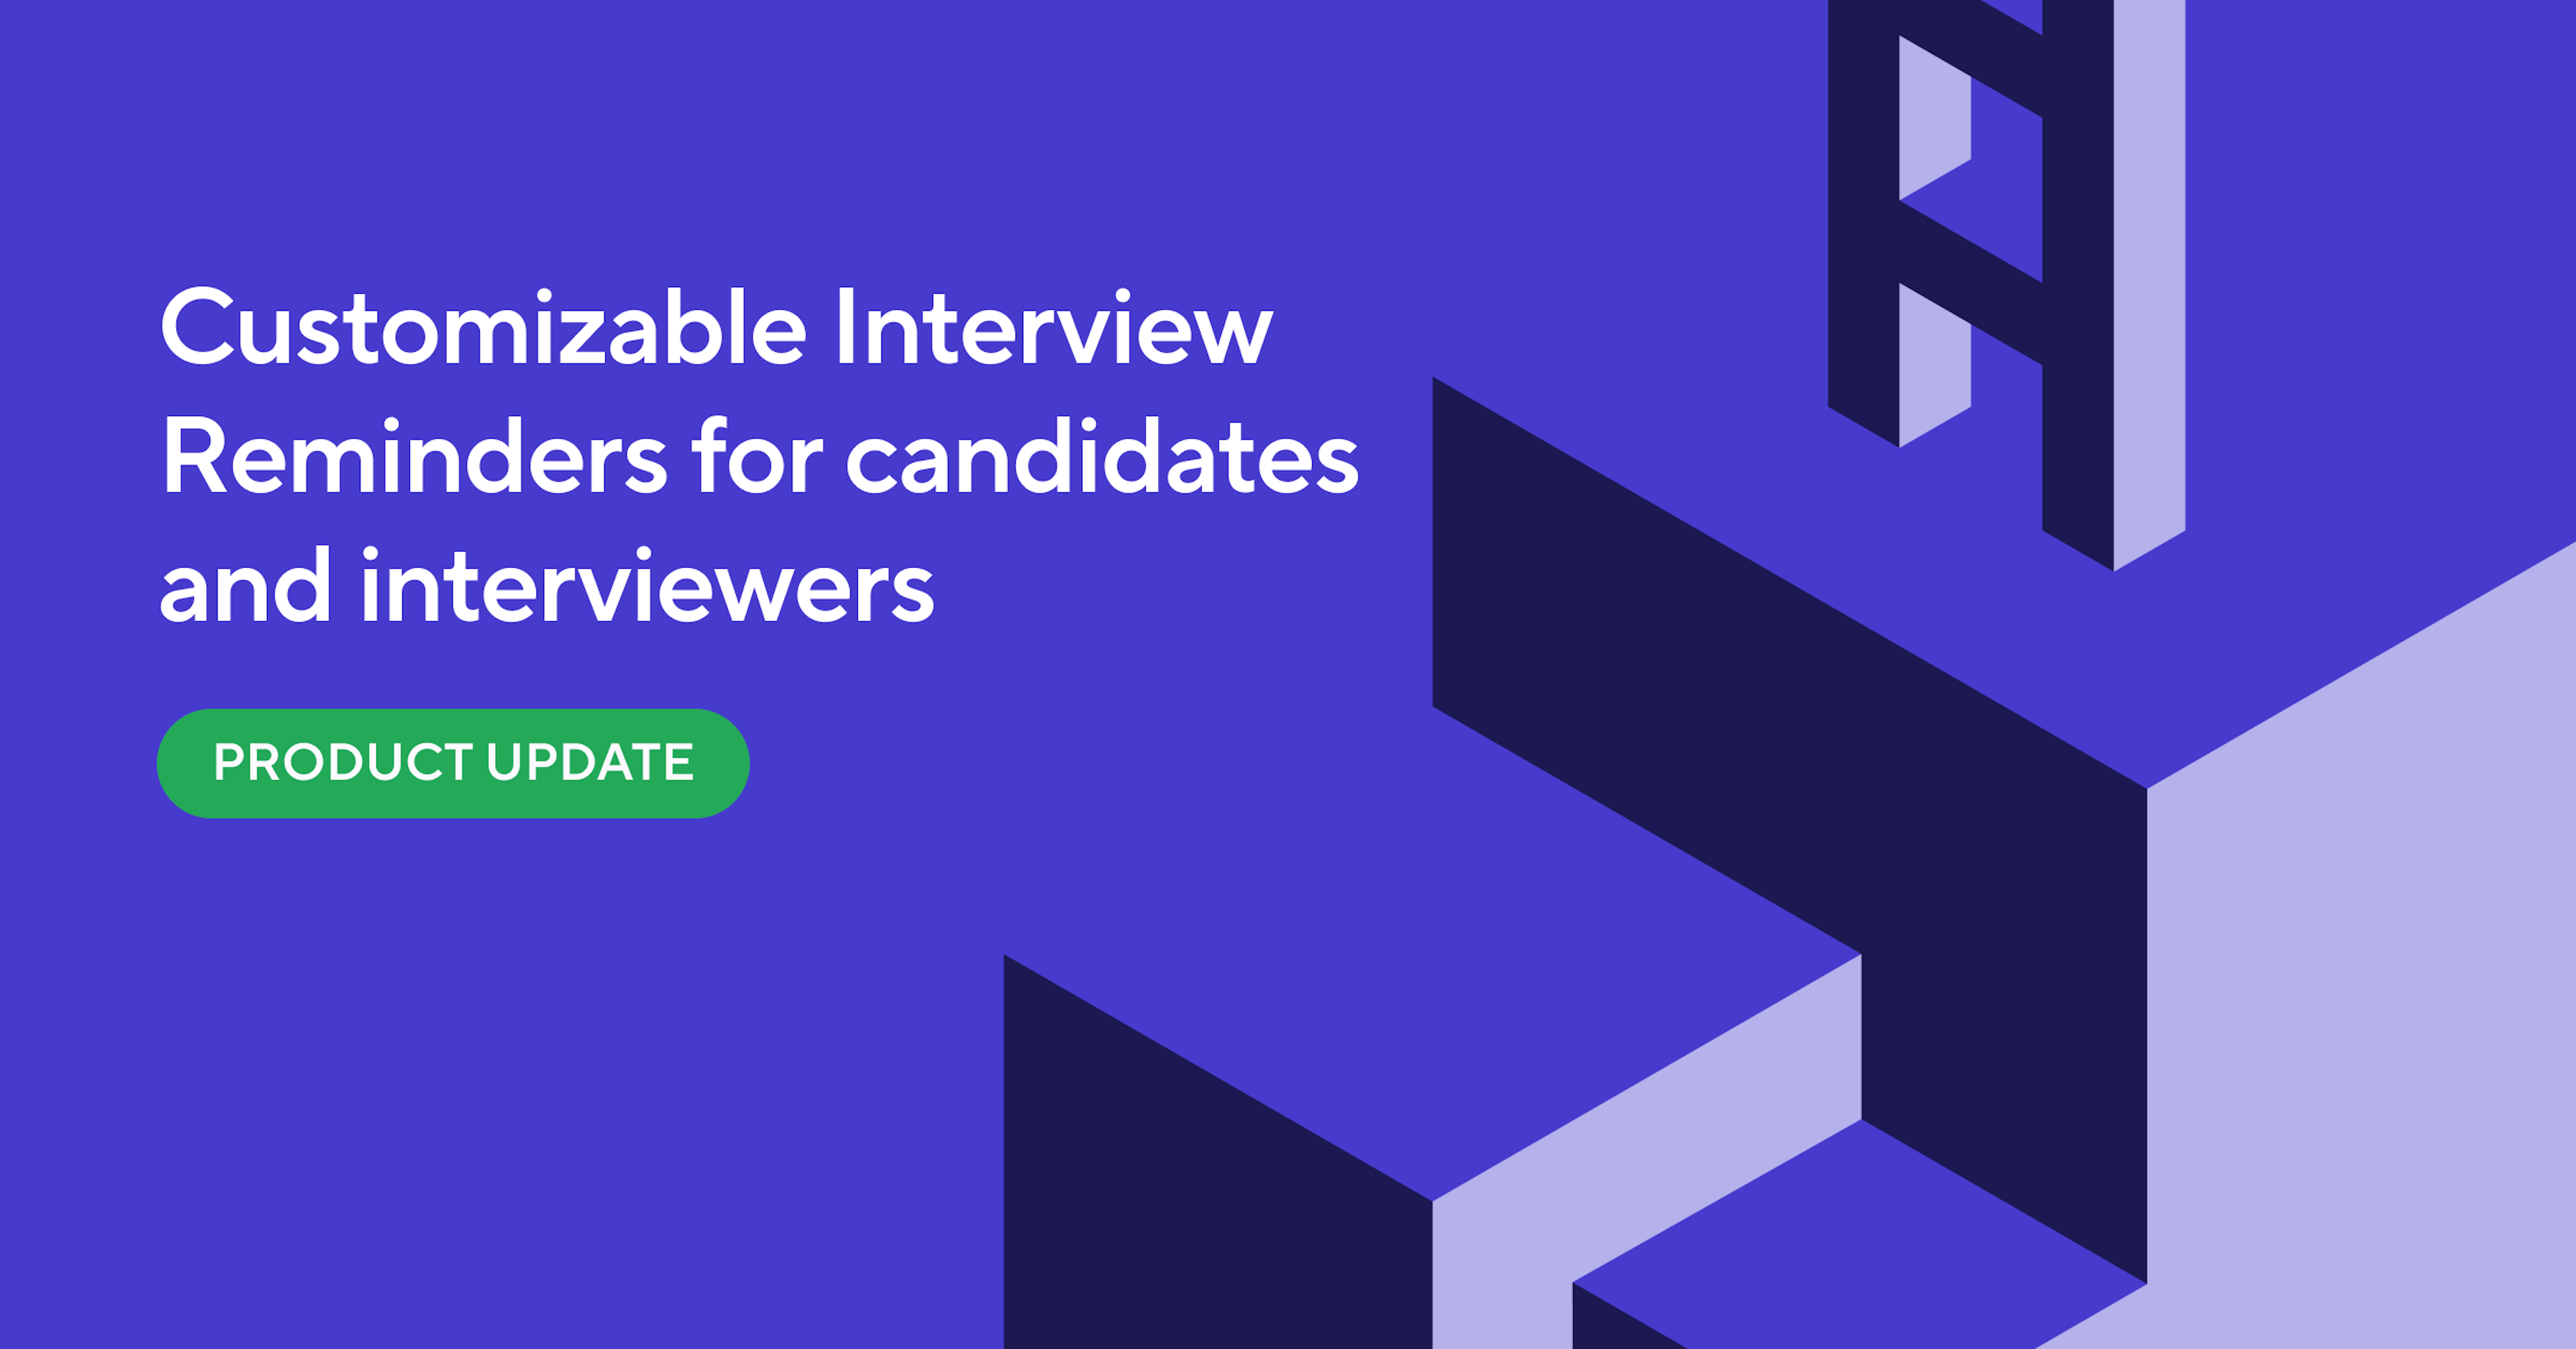 New Feature: Customizable Interview Reminders for Candidates and Interviewers